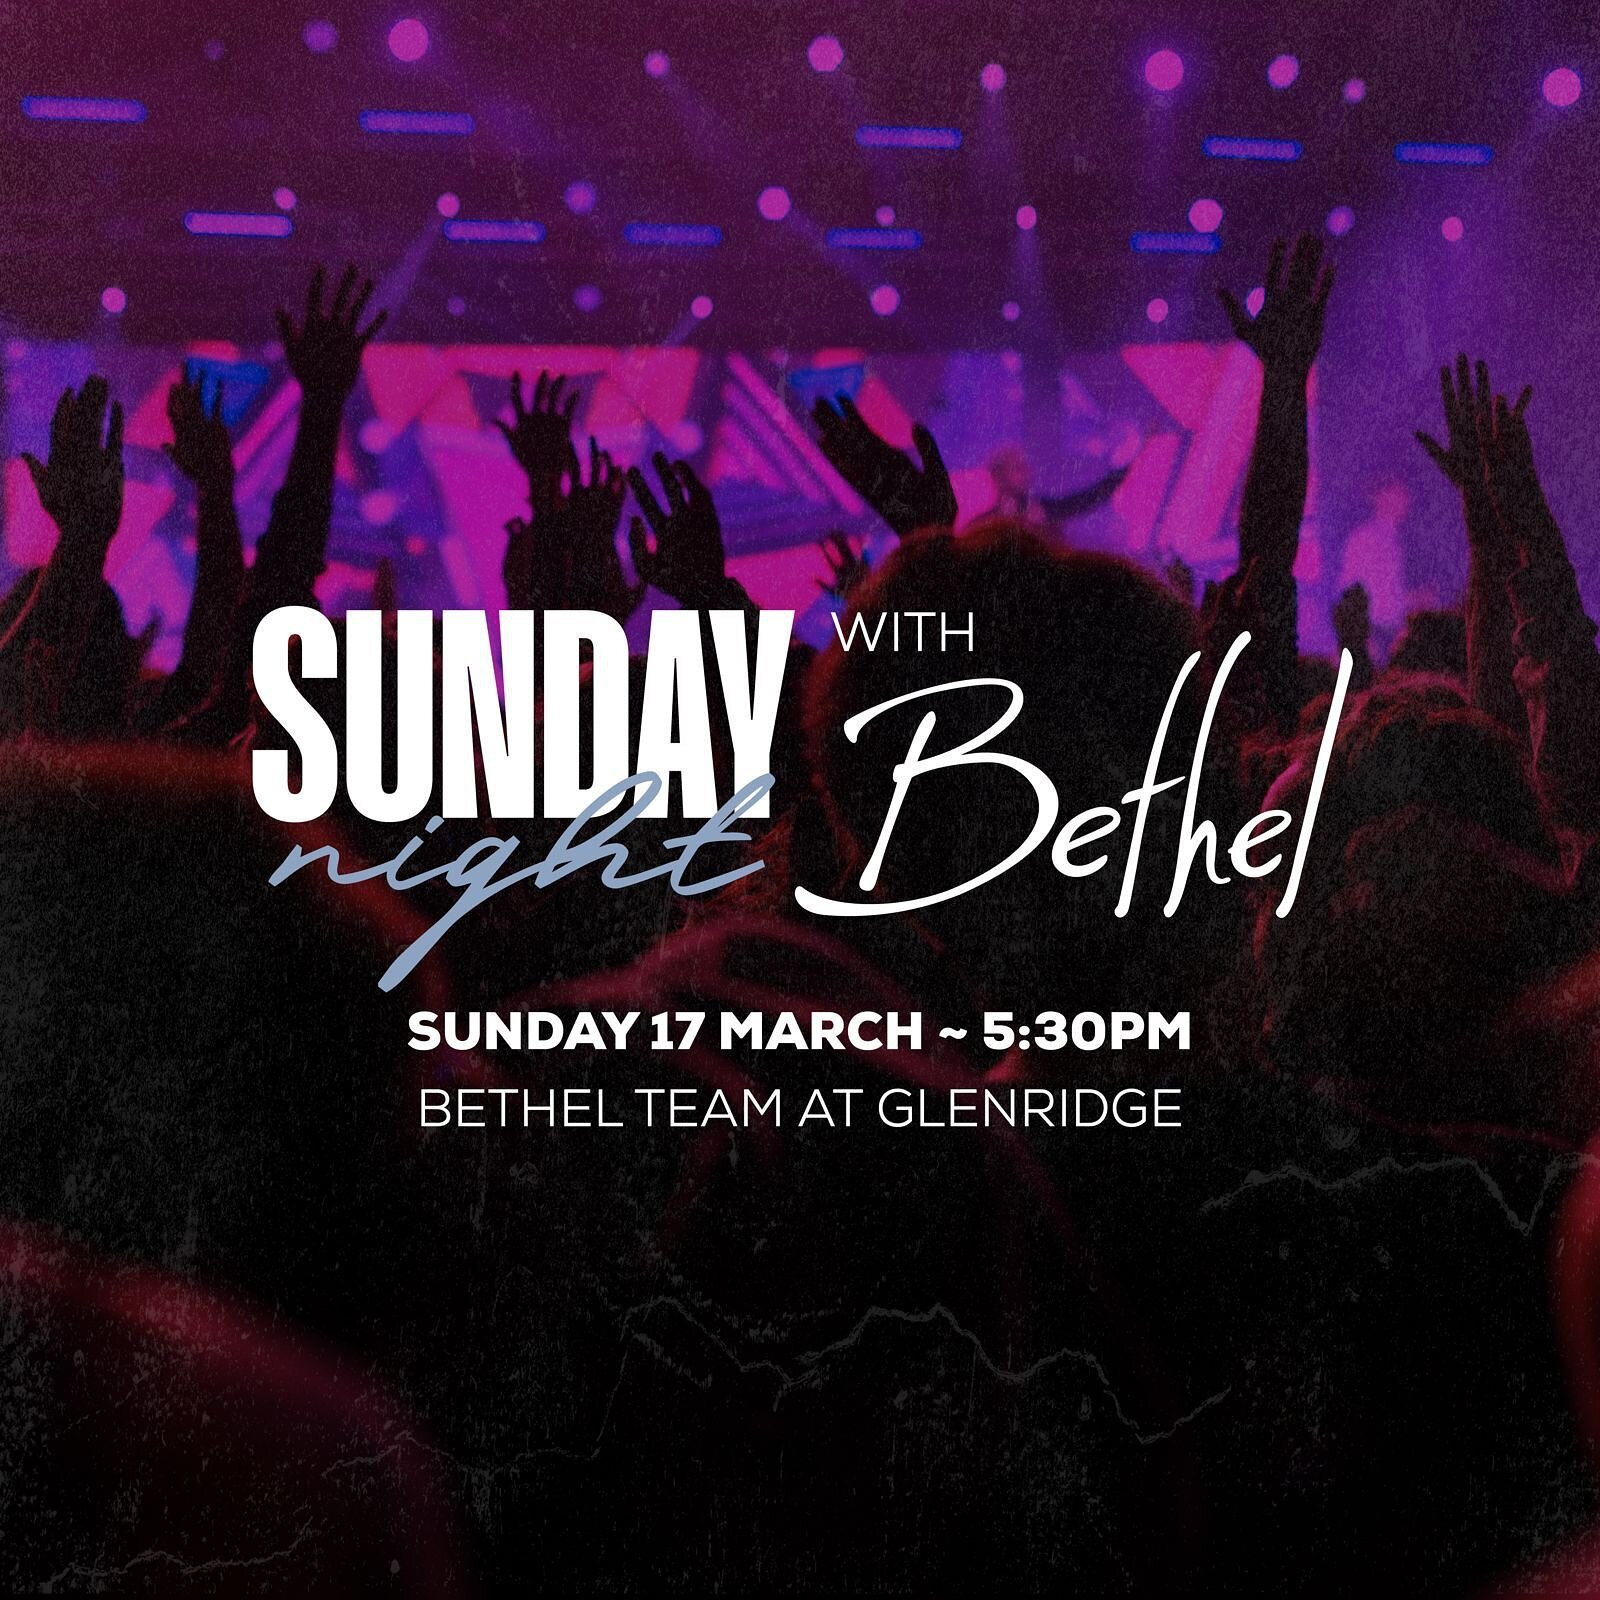 Hey Family - exciting News !

On the 21st of March during the 5:30 PM Service we will be joined by our friends from Bethel 💘

We&rsquo;re so excited to host them and have them in our home. 
Come along and show them love - See you there! 🪩